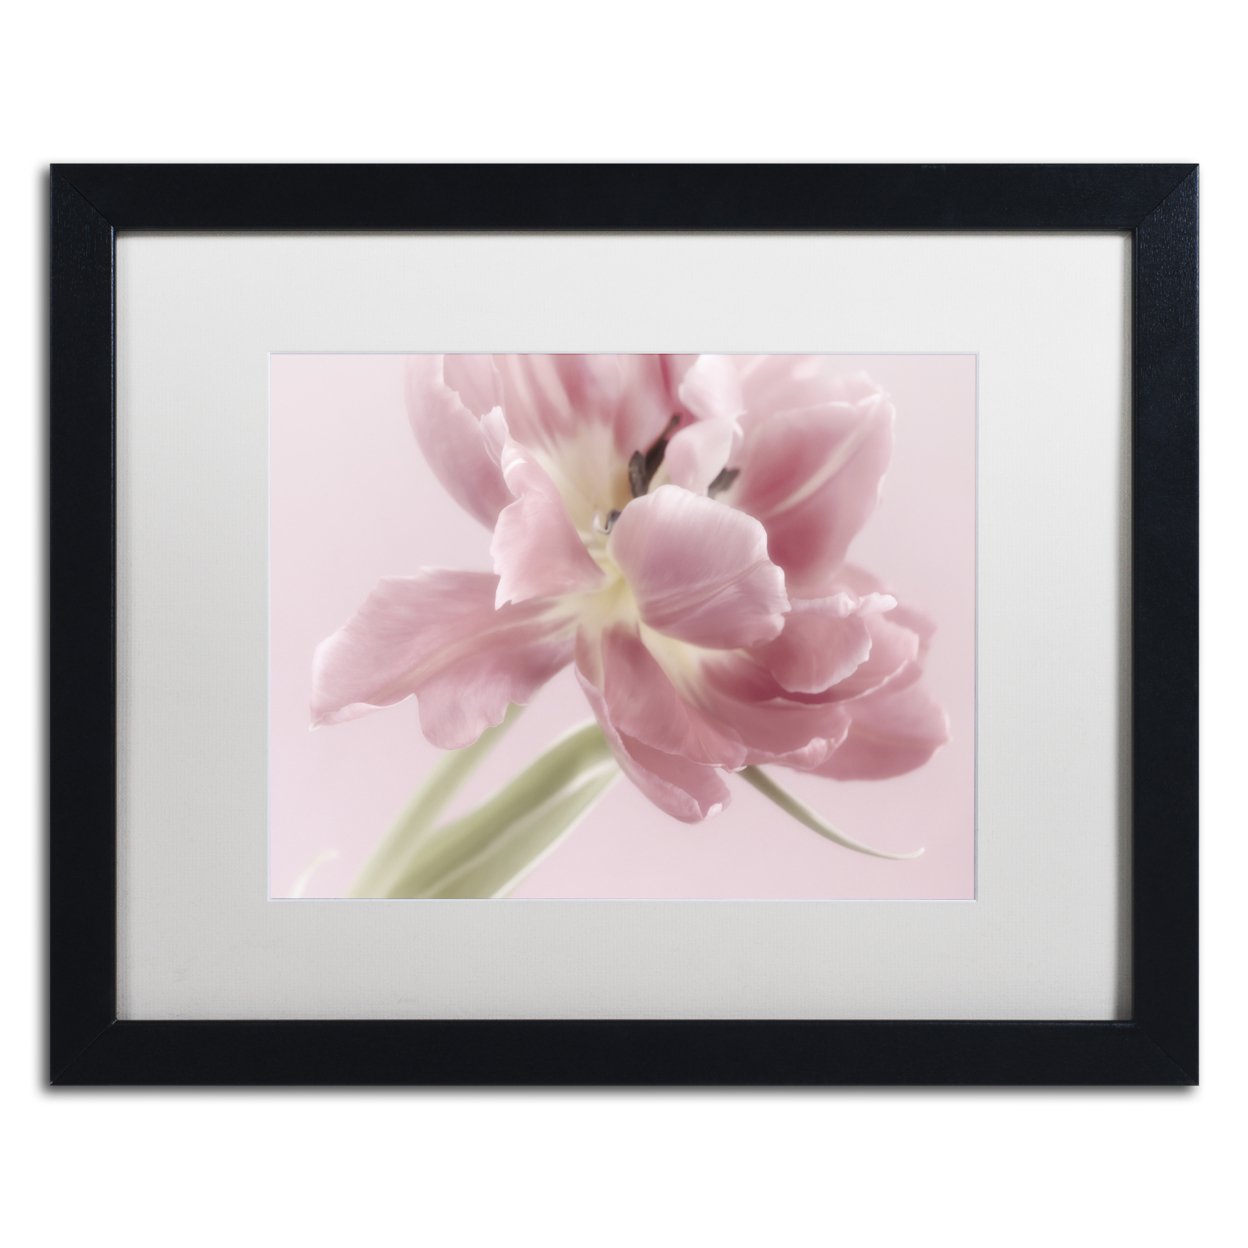 Cora Niele 'Soft Pink Tulip' Black Wooden Framed Art 18 X 22 Inches